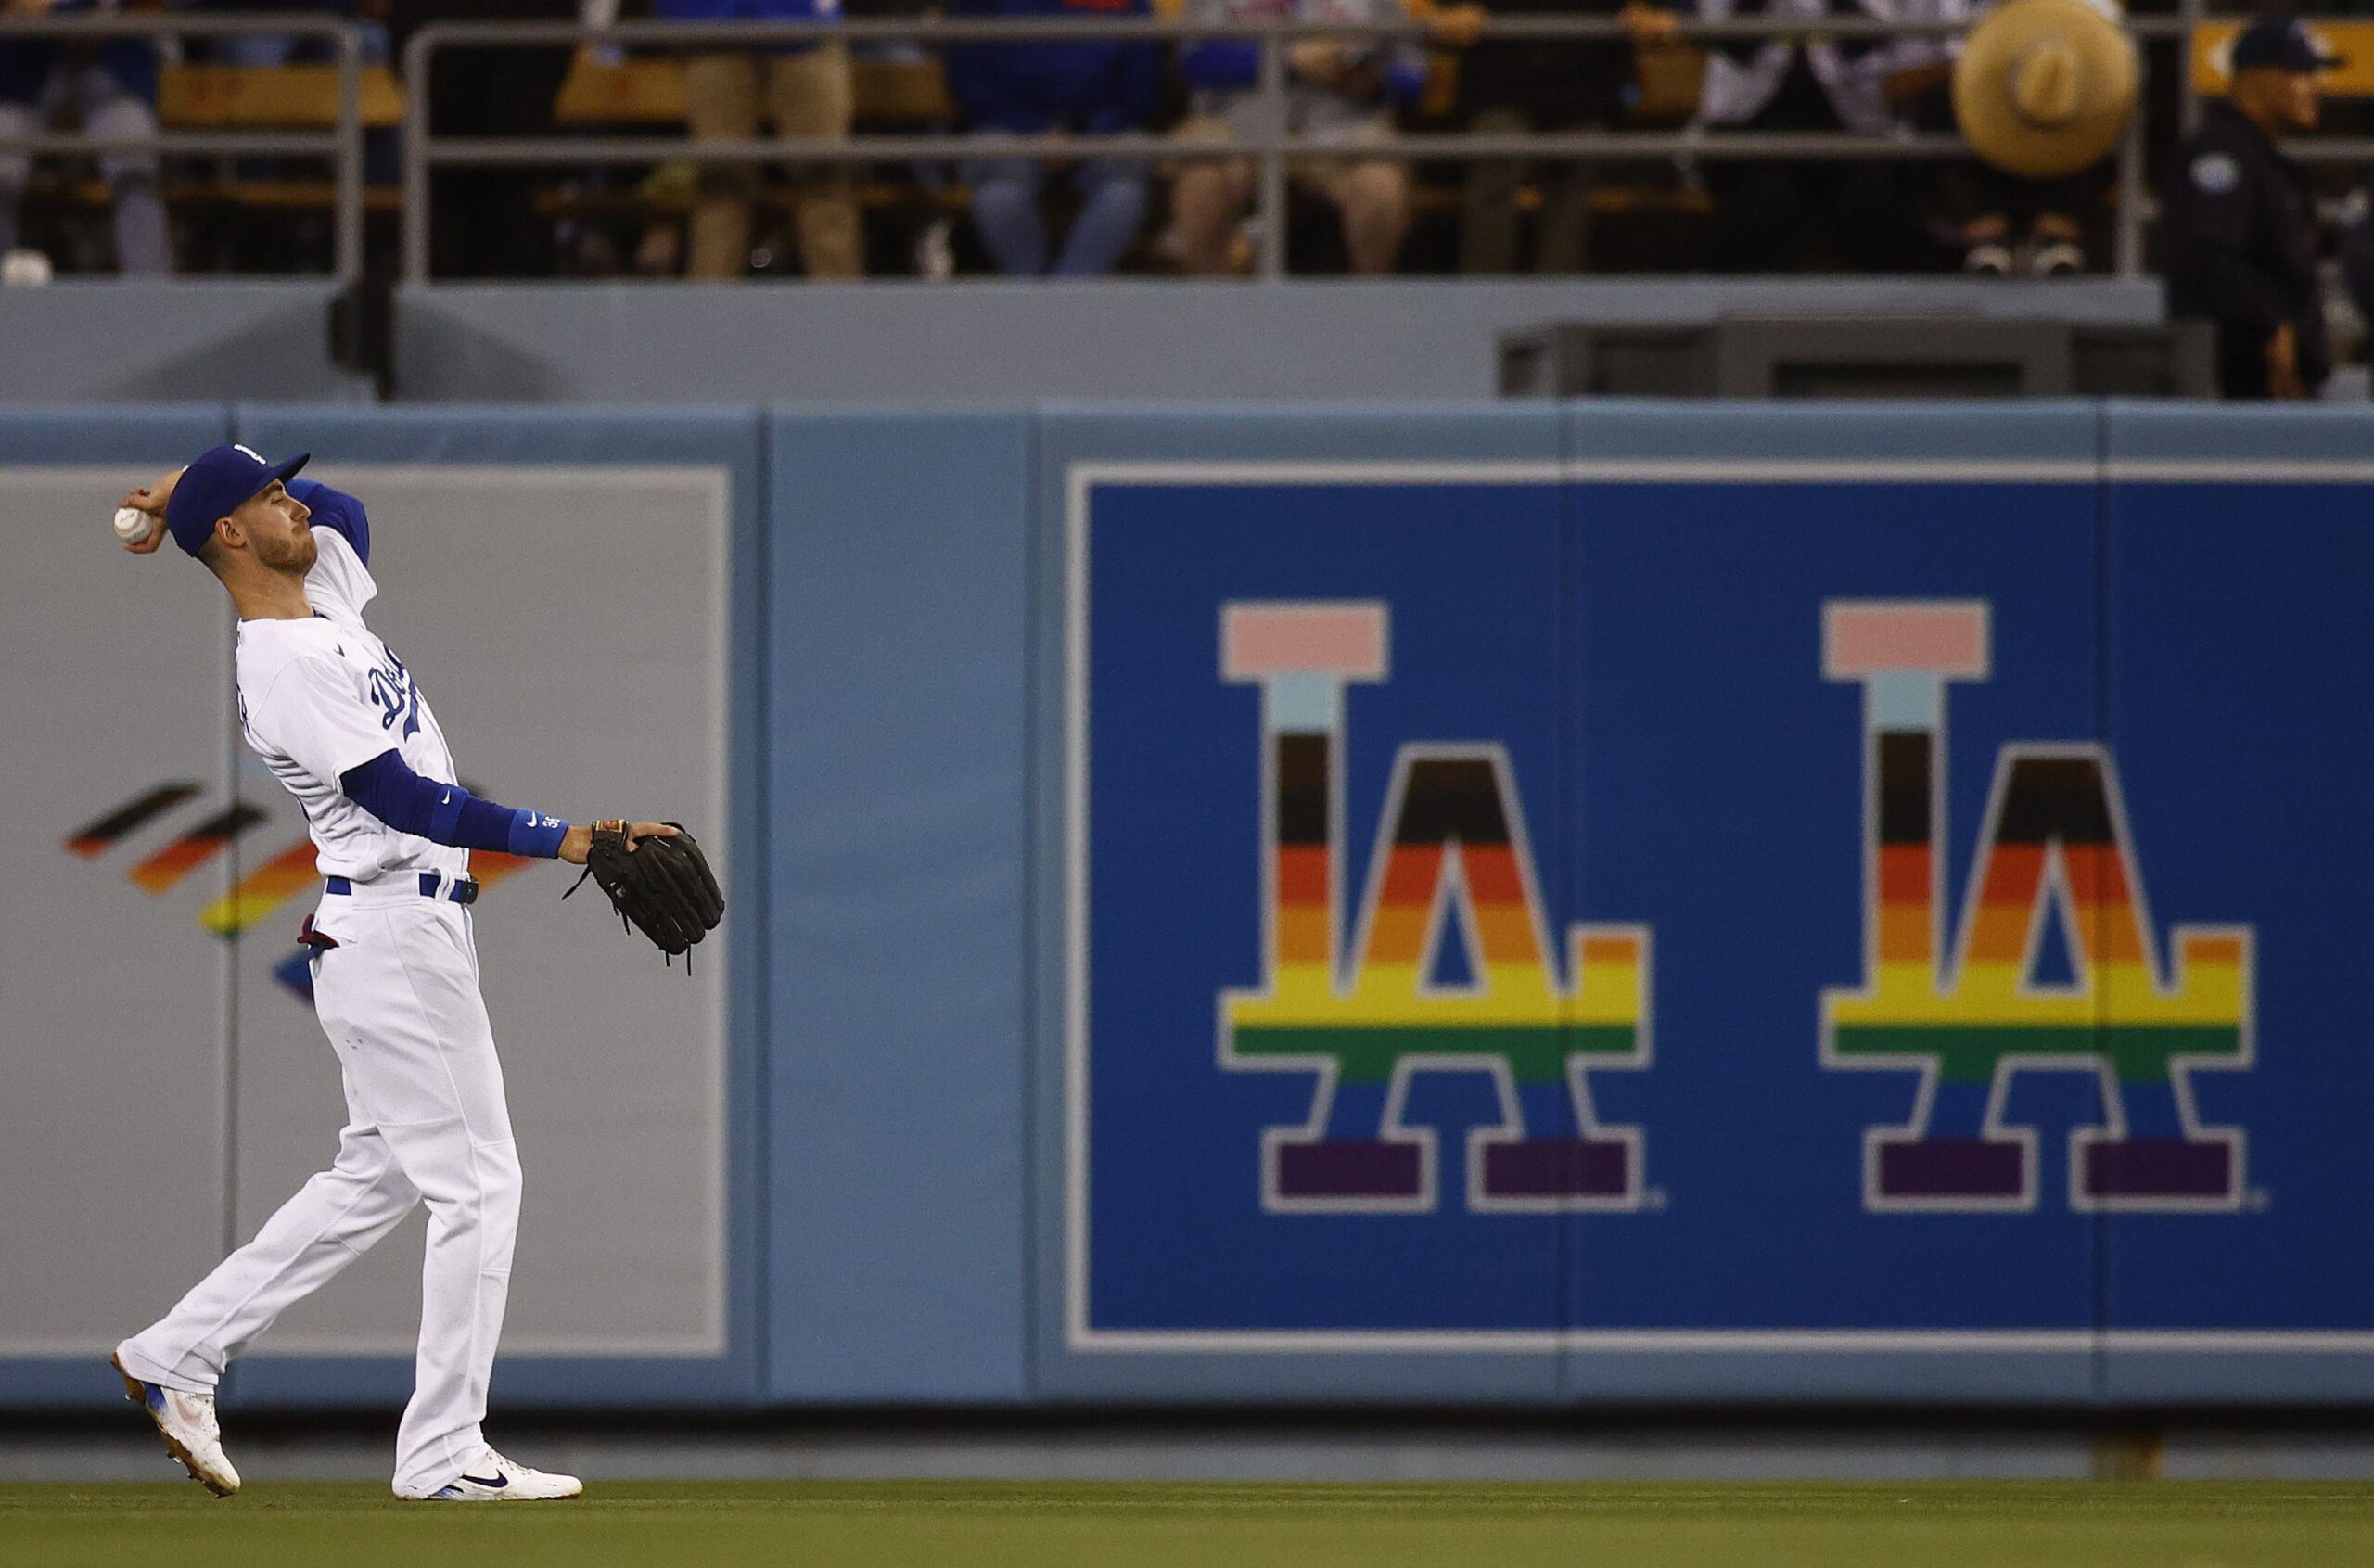 Los Angeles Dodgers pull drag group from Pride Night festivities